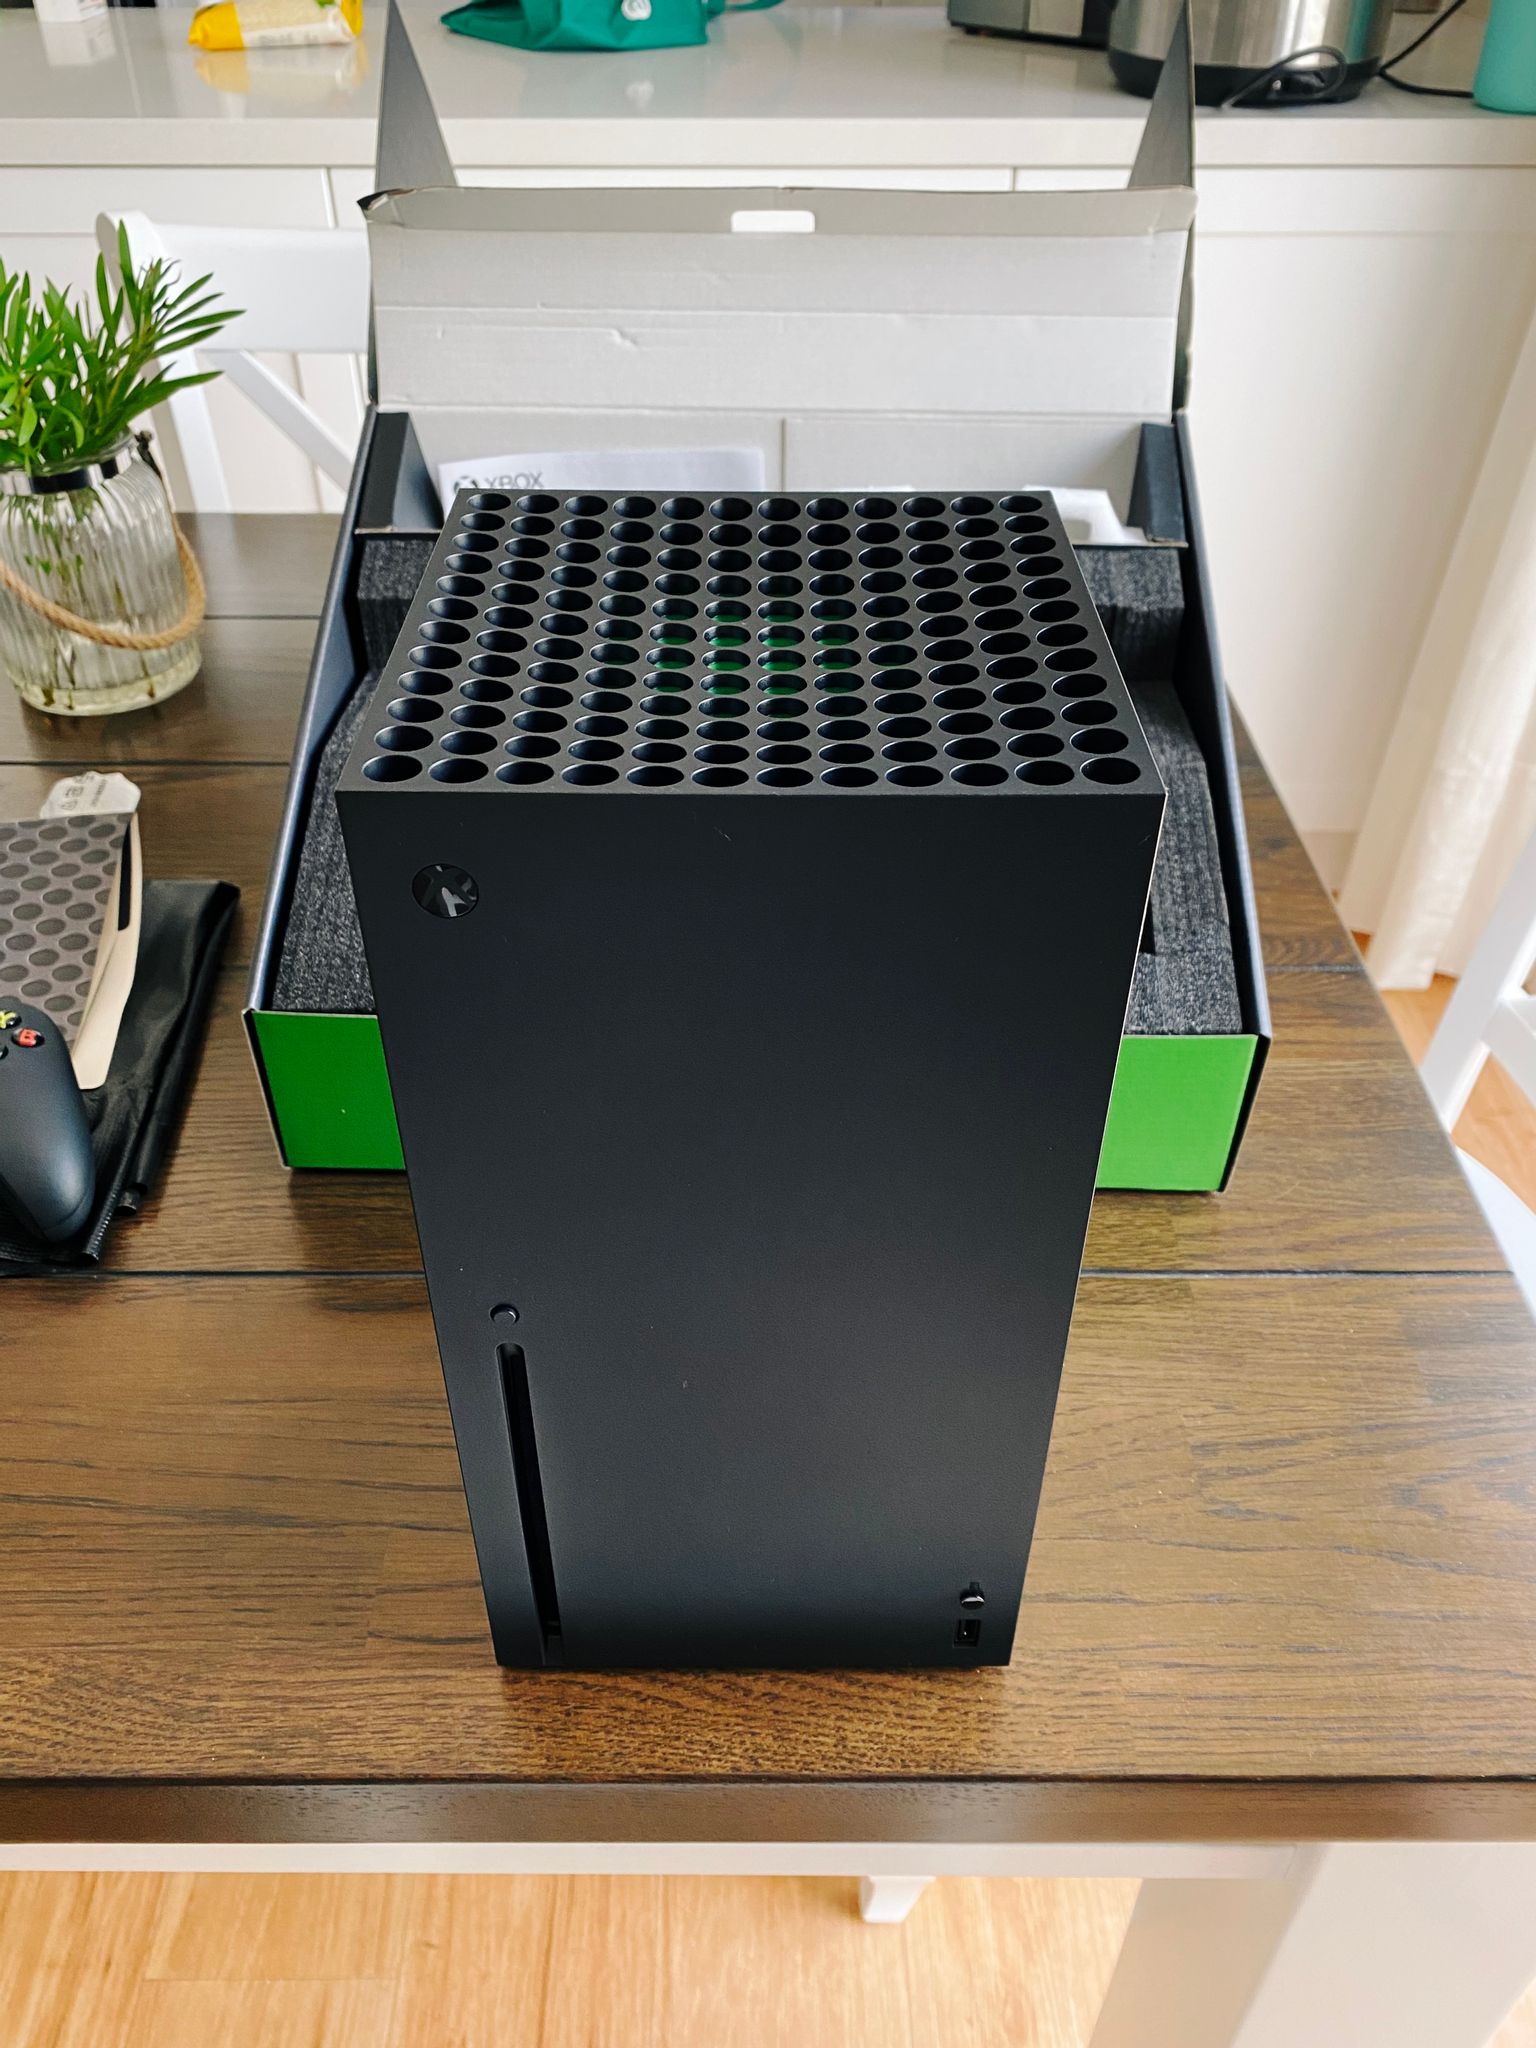 A photo of an Xbox Series X standing in front of the Xbox Series X box.